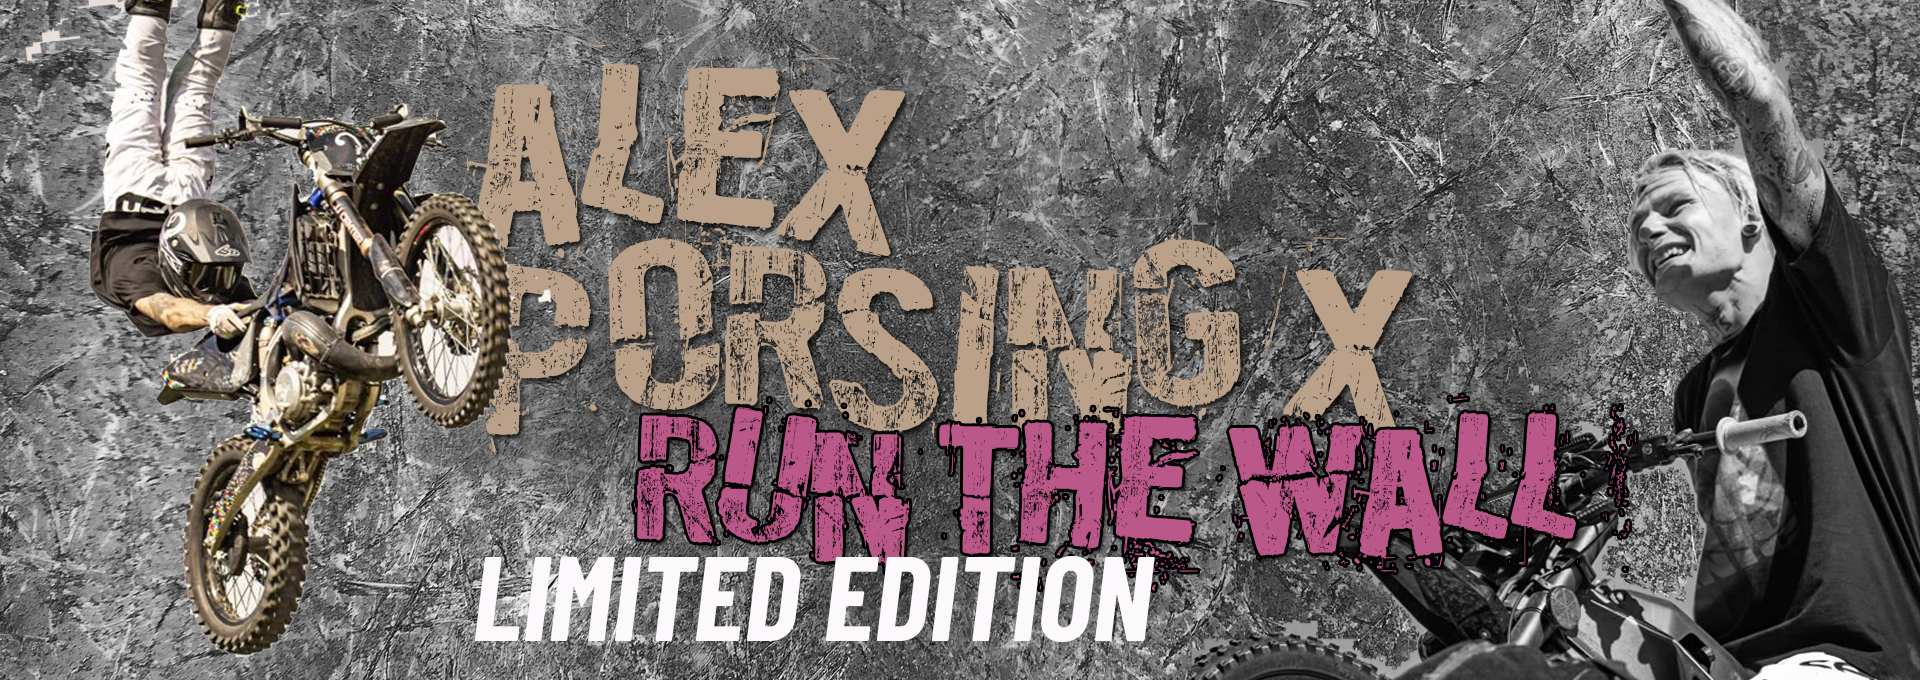 Alex porsing limited edition collection